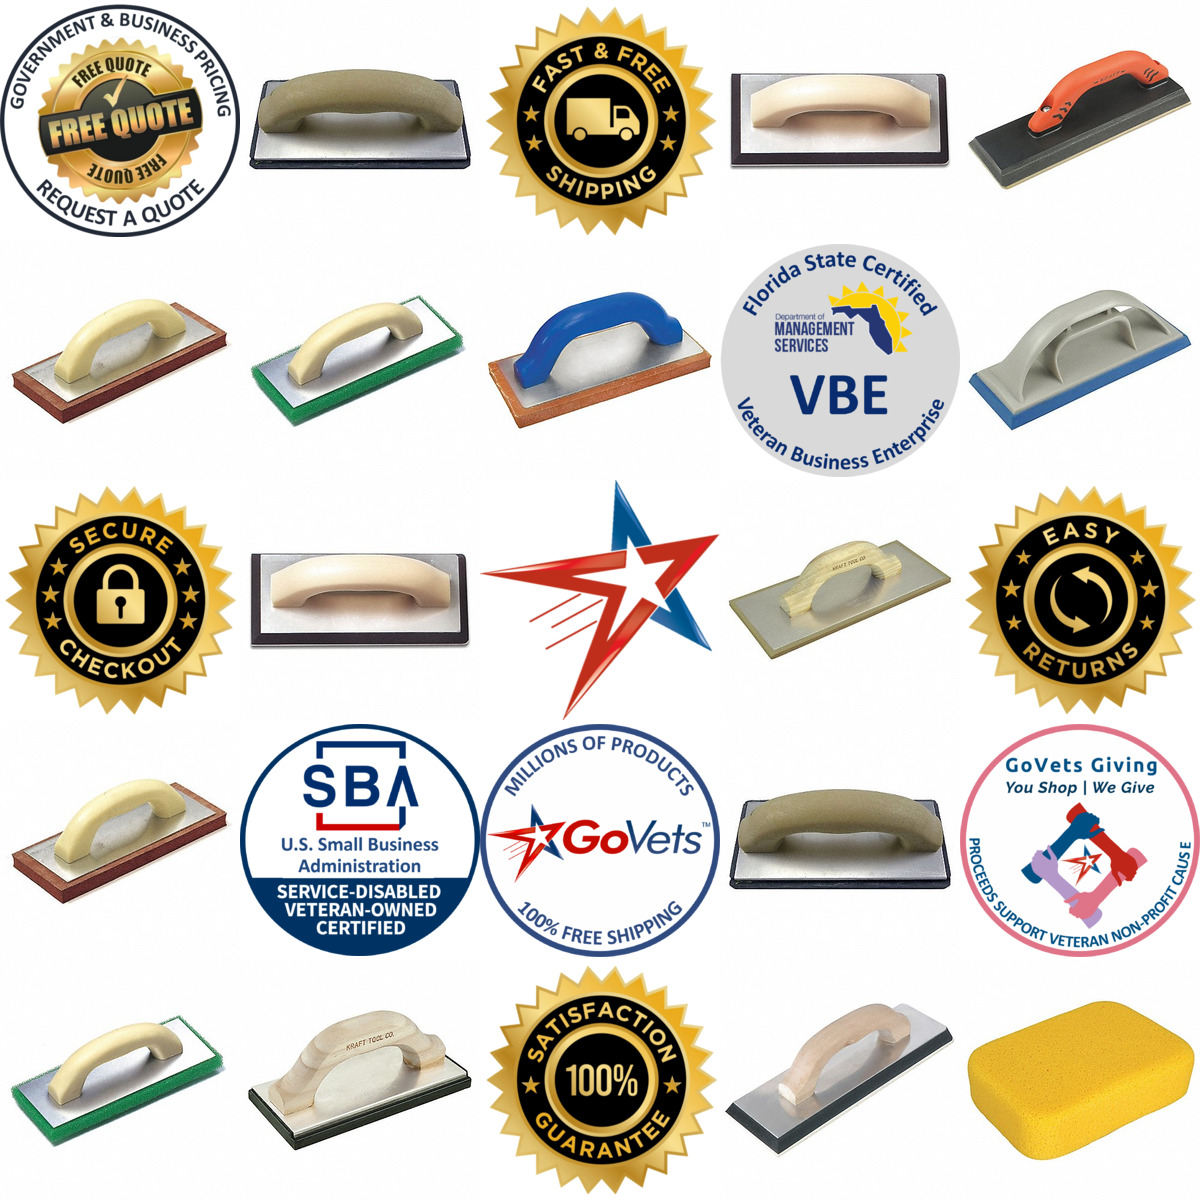 A selection of Tile Floats products on GoVets